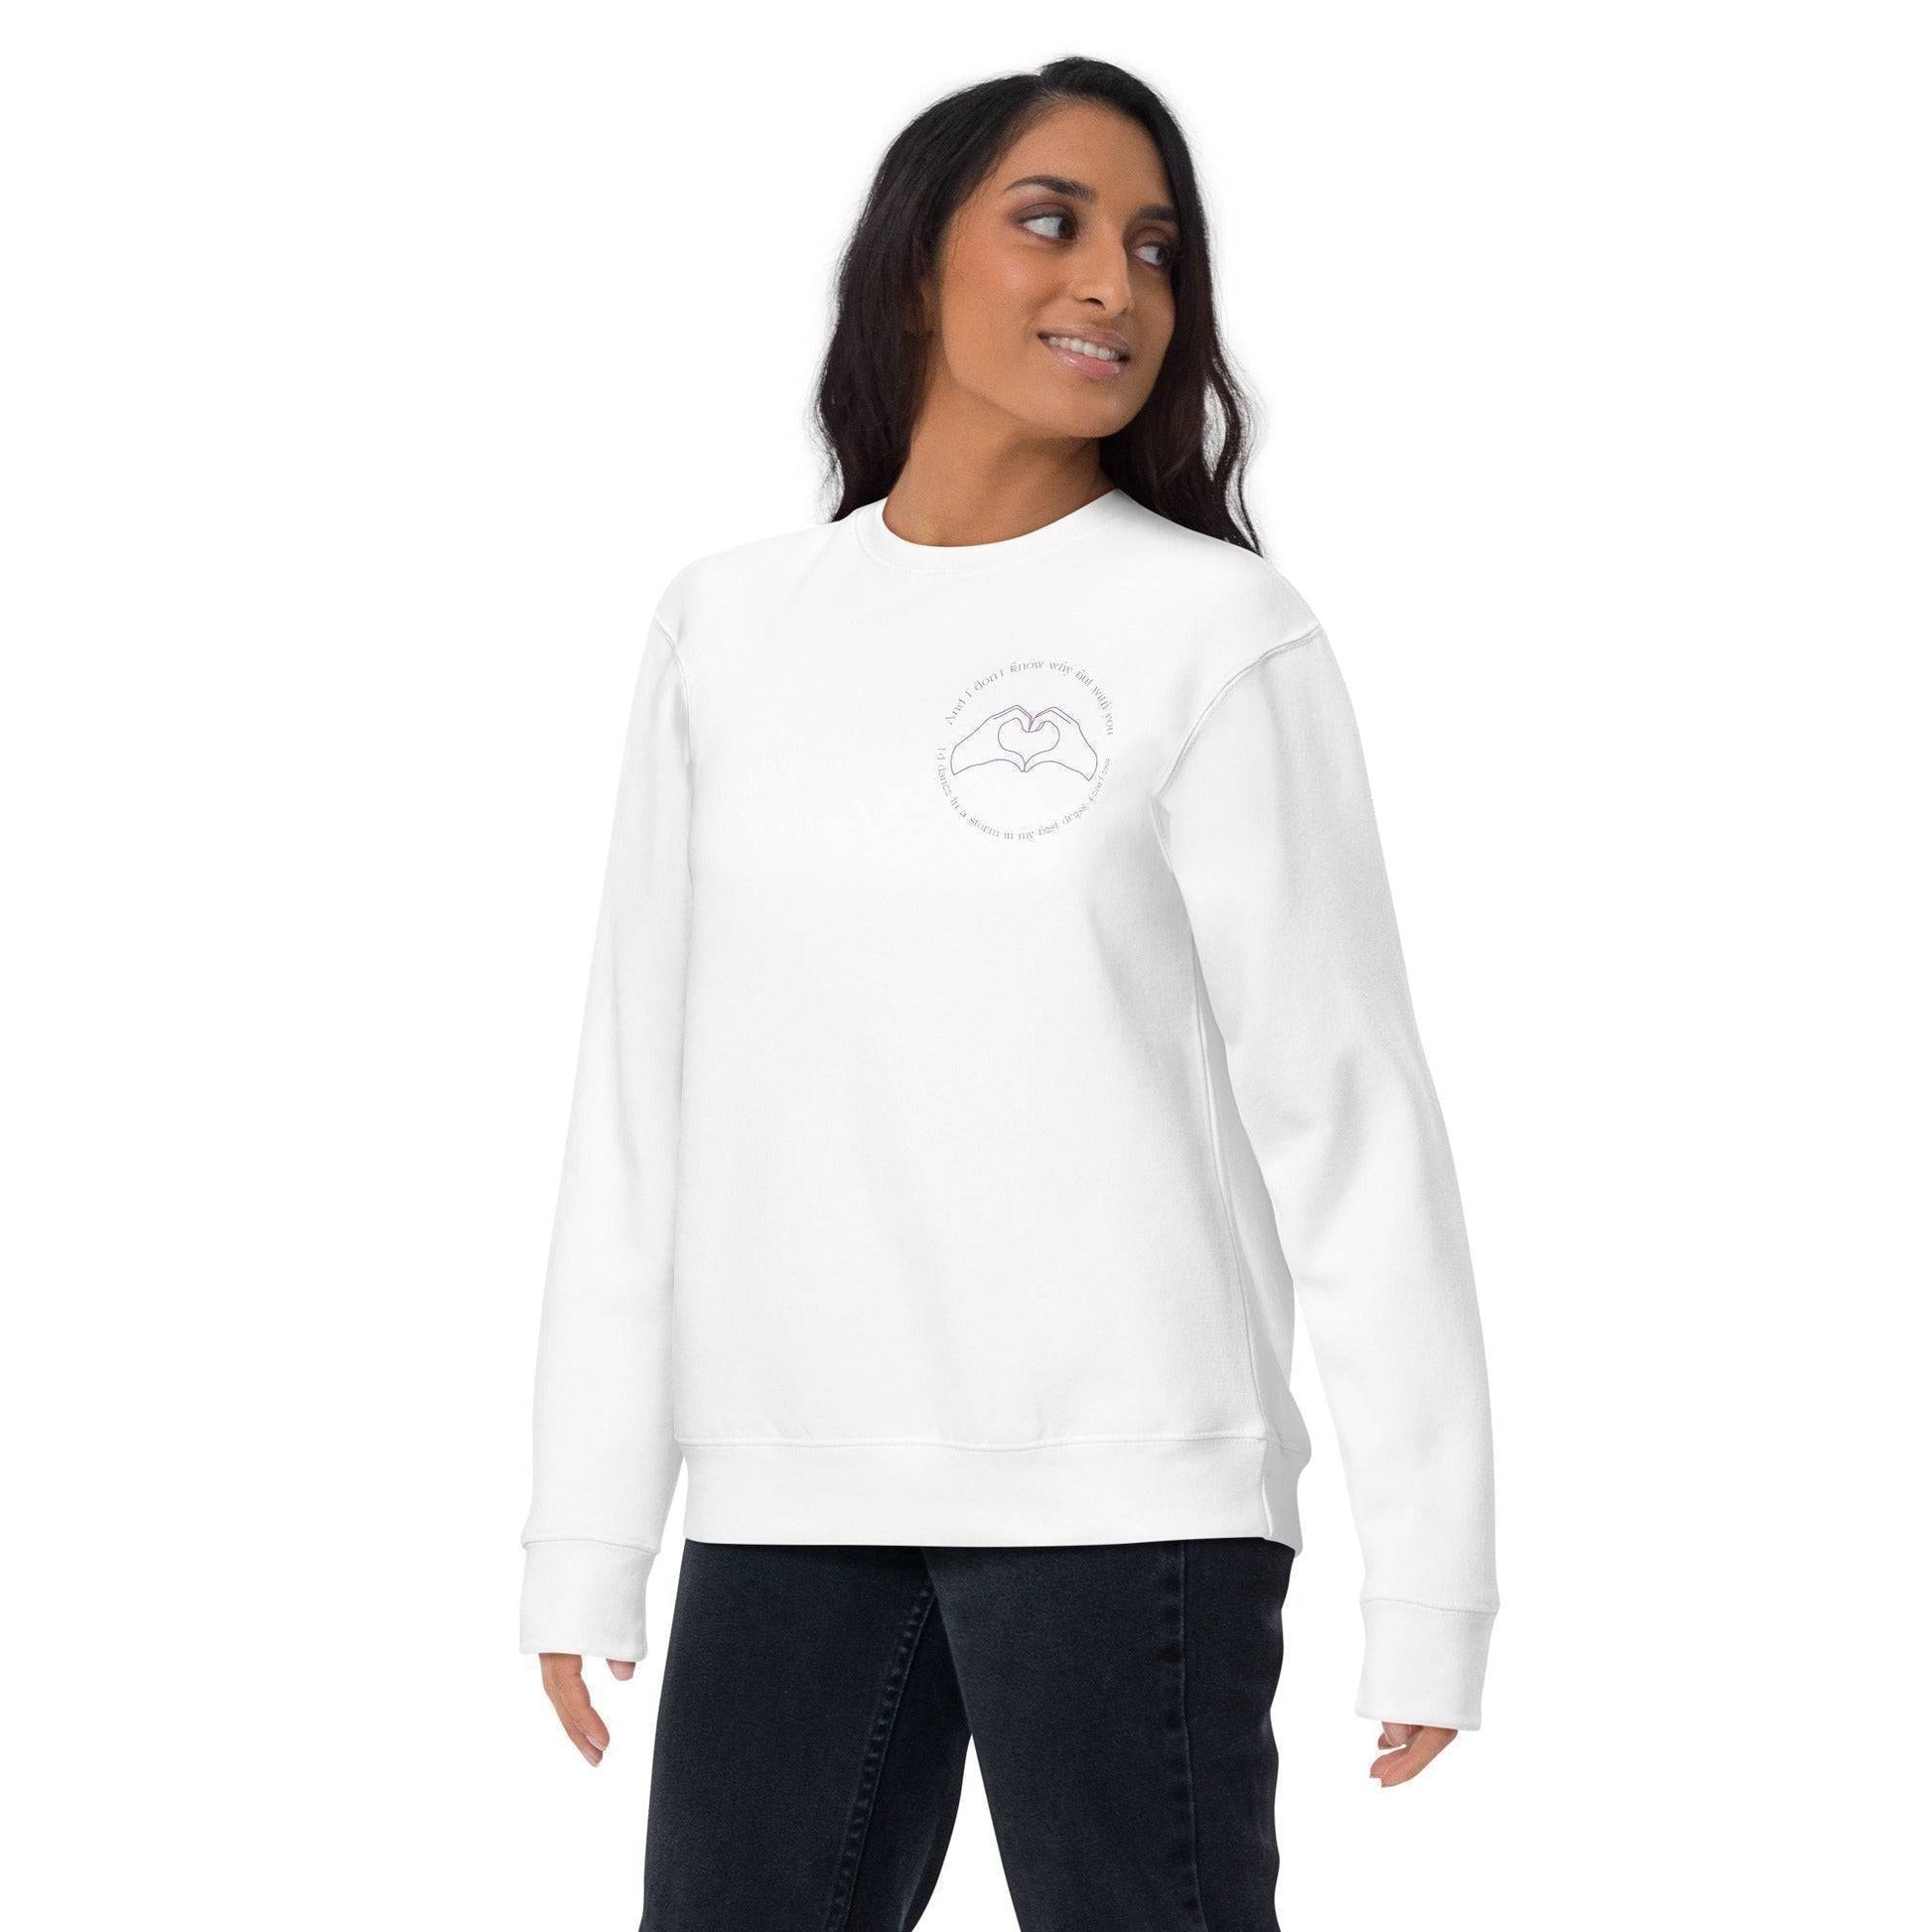 Taylor Swift Fearless Embroidered Sweatshirt White